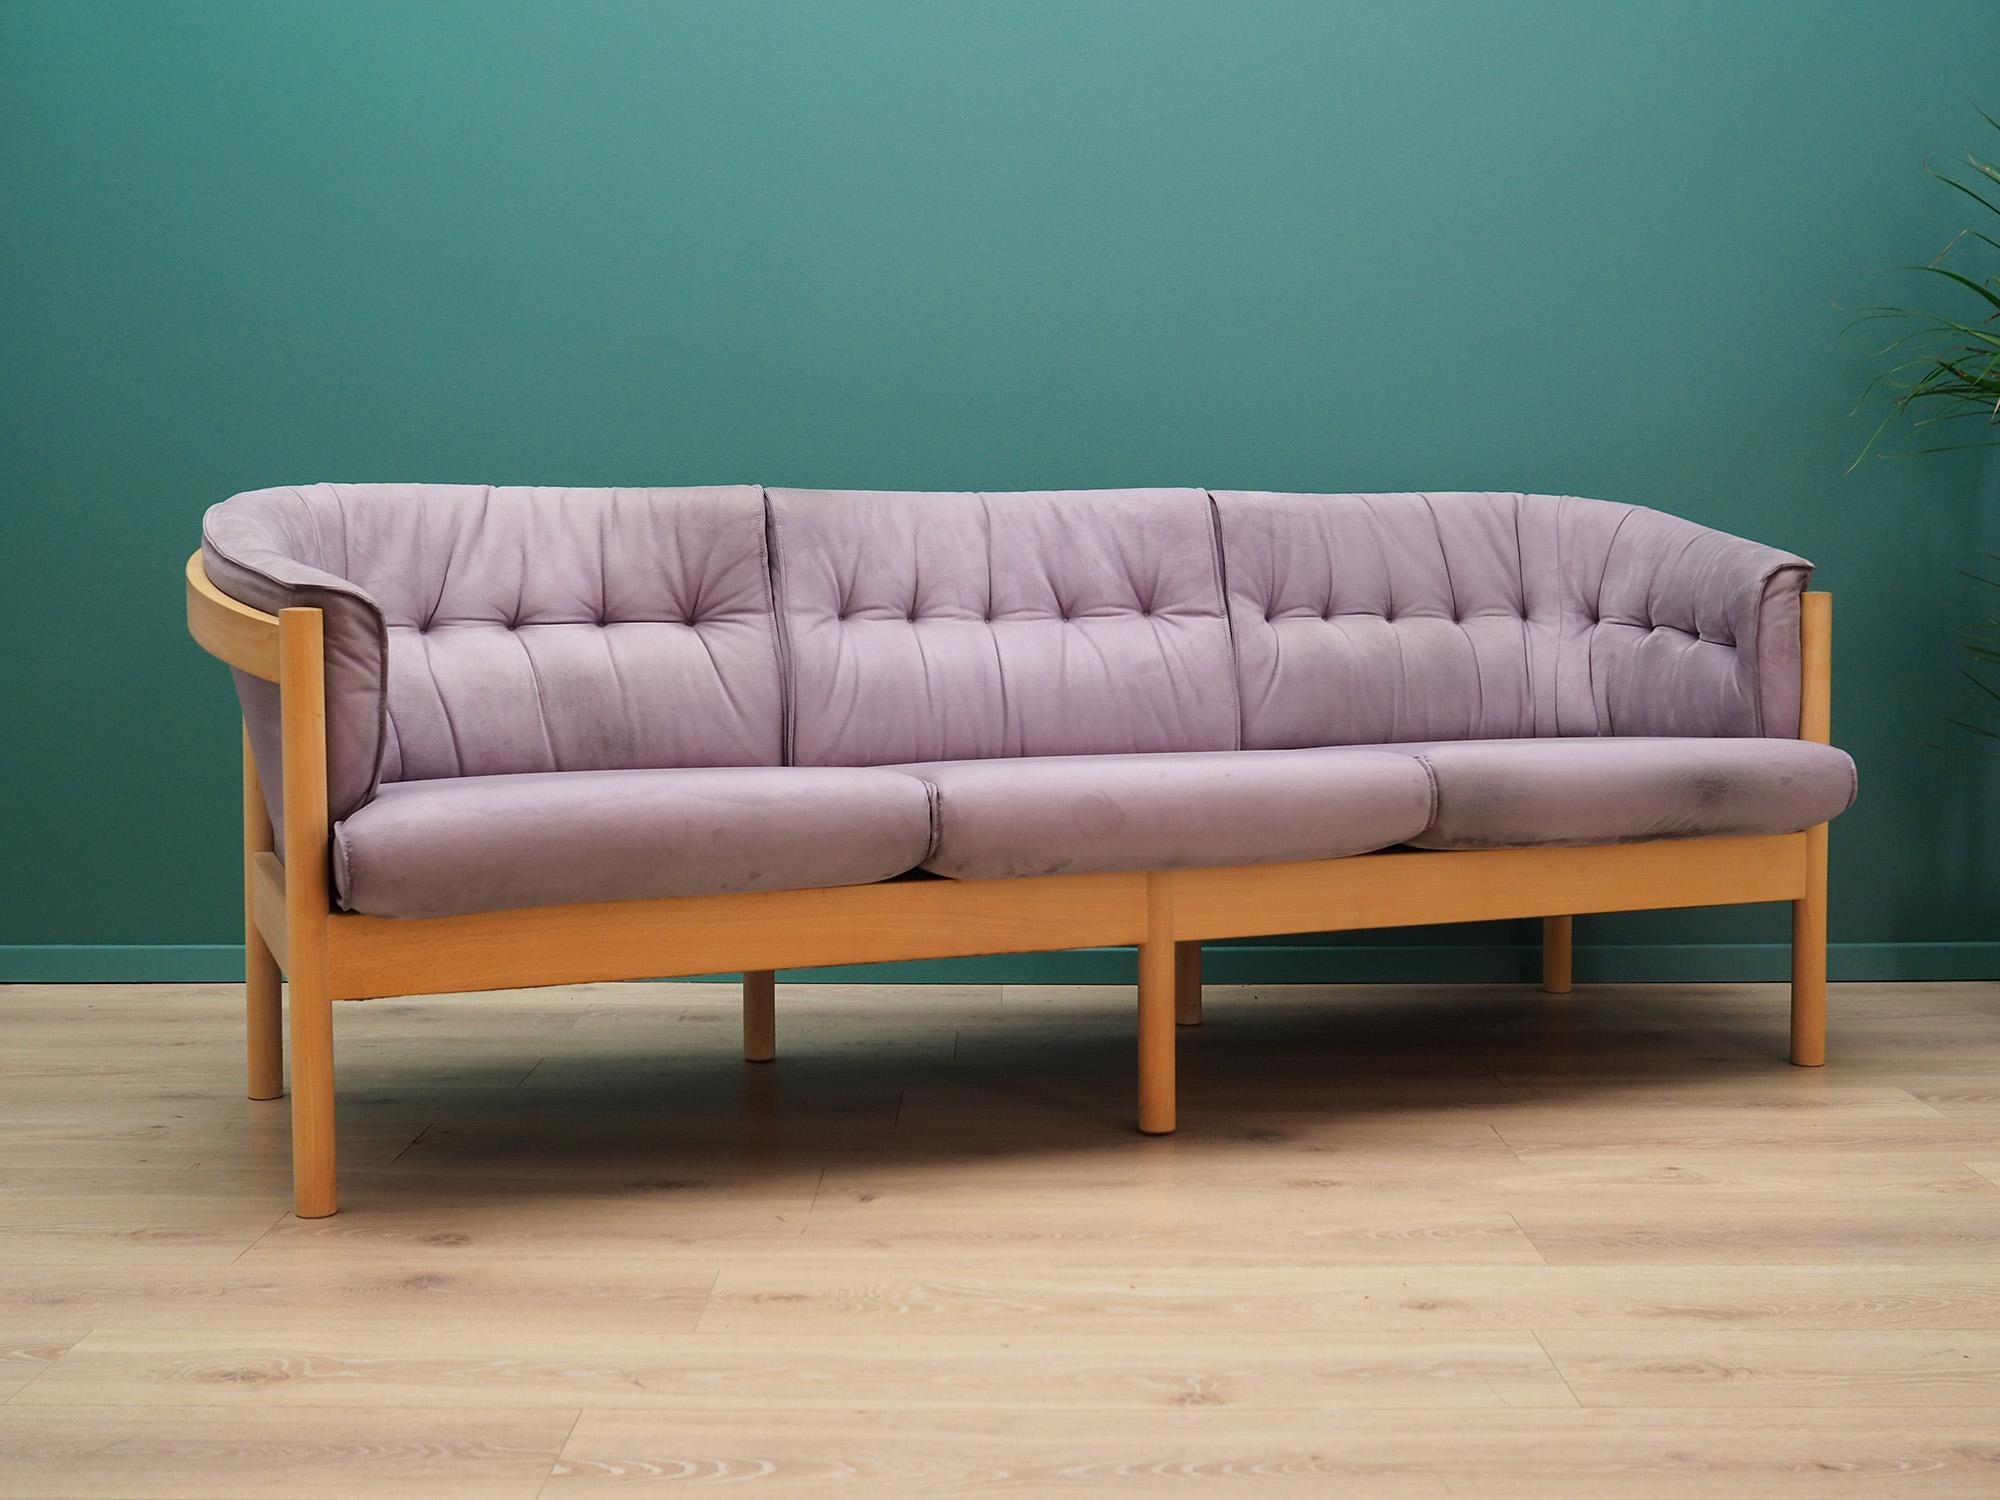 Exceptional sofa from the 1960s-1970s. Scandinavian design, Minimalist form. Original upholstery made of grey velour, ash structure. Preserved in good condition (minor bruises and scratches, filled veneer cavities) - directly for use.

Dimensions: